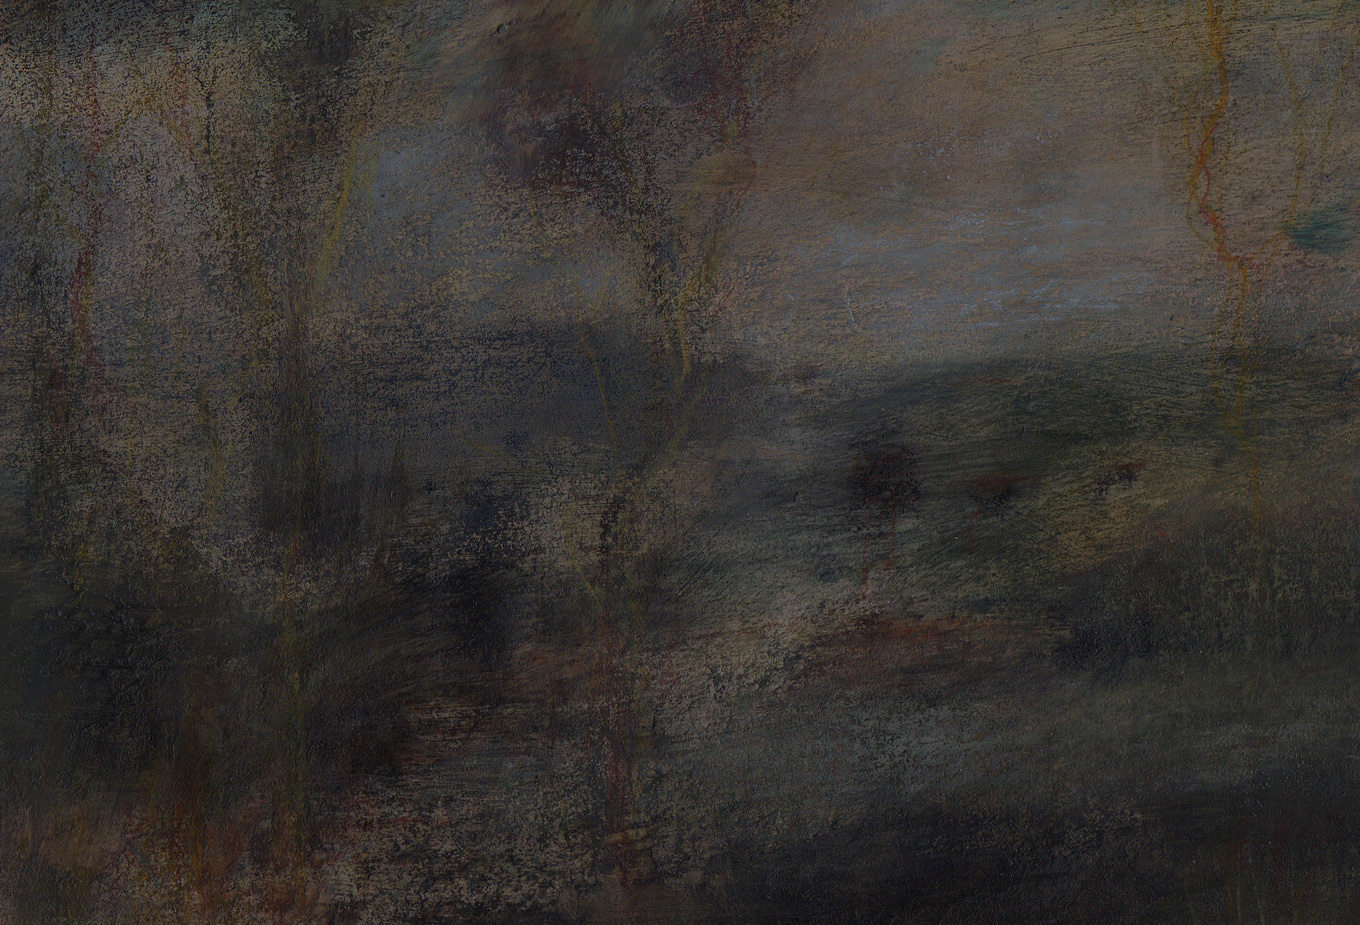 L1150 - Nicholas Herbert, British Artist, mixed media landscape painting of a view of trees on Sharpenhoe, 2019